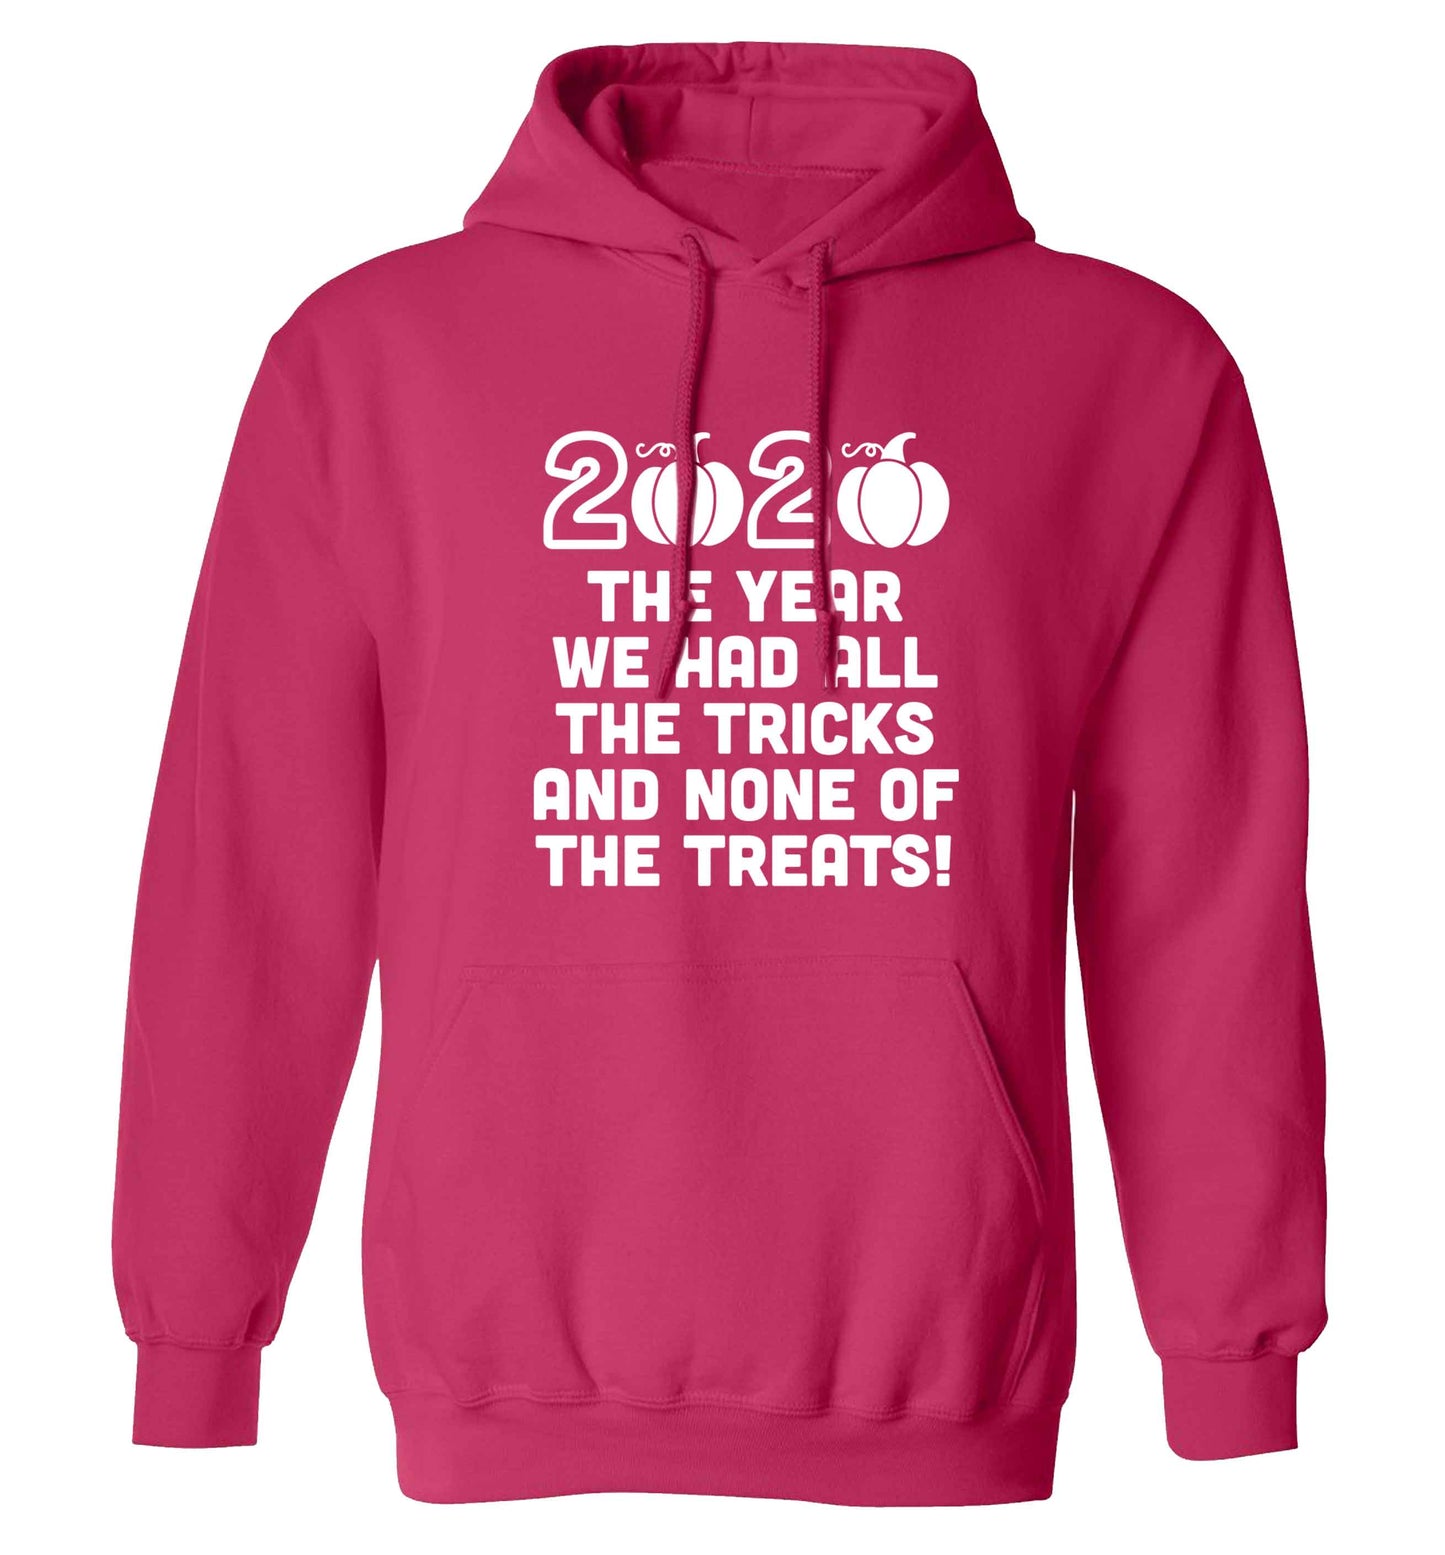 2020 The year we had all of the tricks and none of the treats adults unisex pink hoodie 2XL